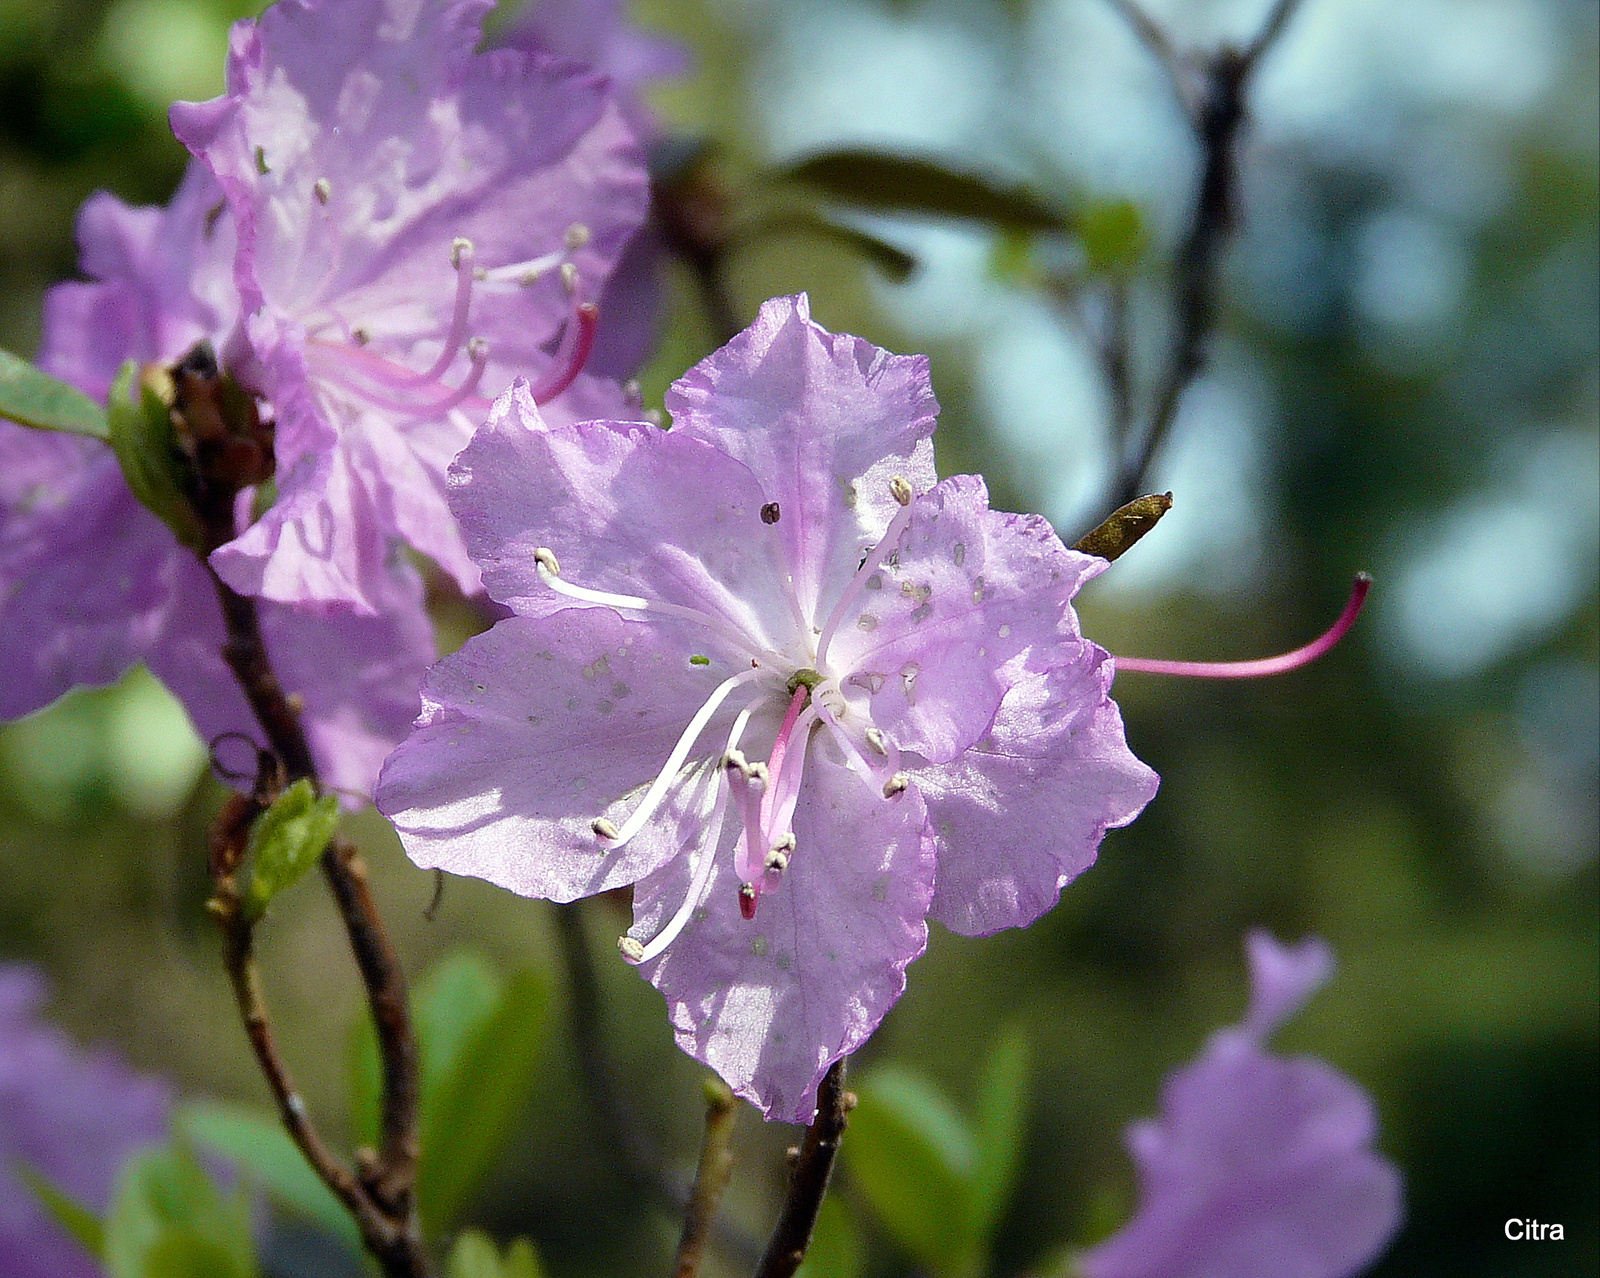 Rhododendron 17